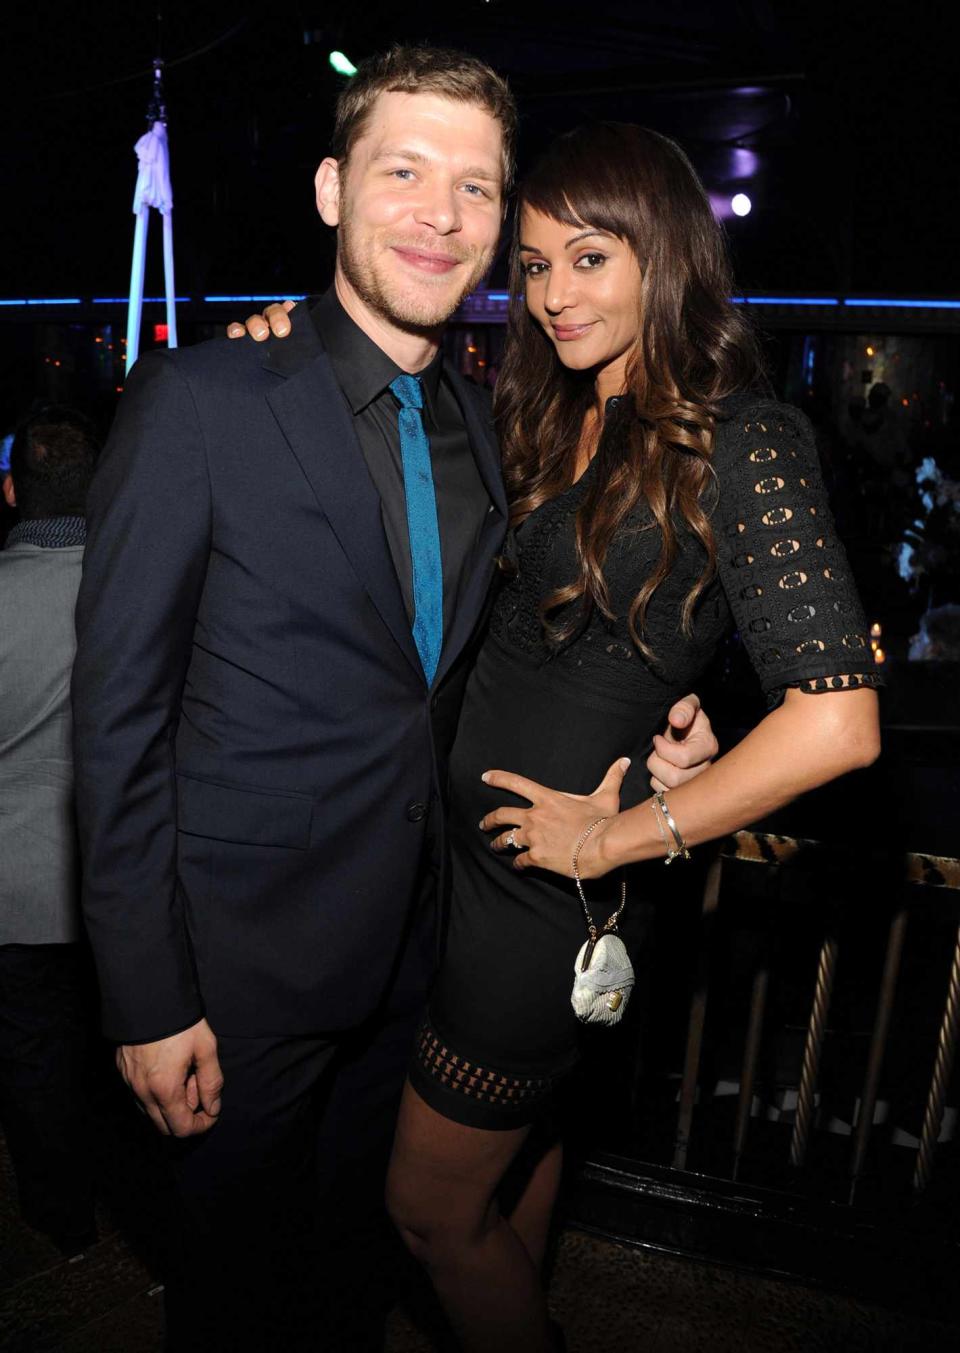 Joseph Morgan and Persia White attend The CW Network's 2014 Upfront party at Paramount Hotel on May 15, 2014 in New York City